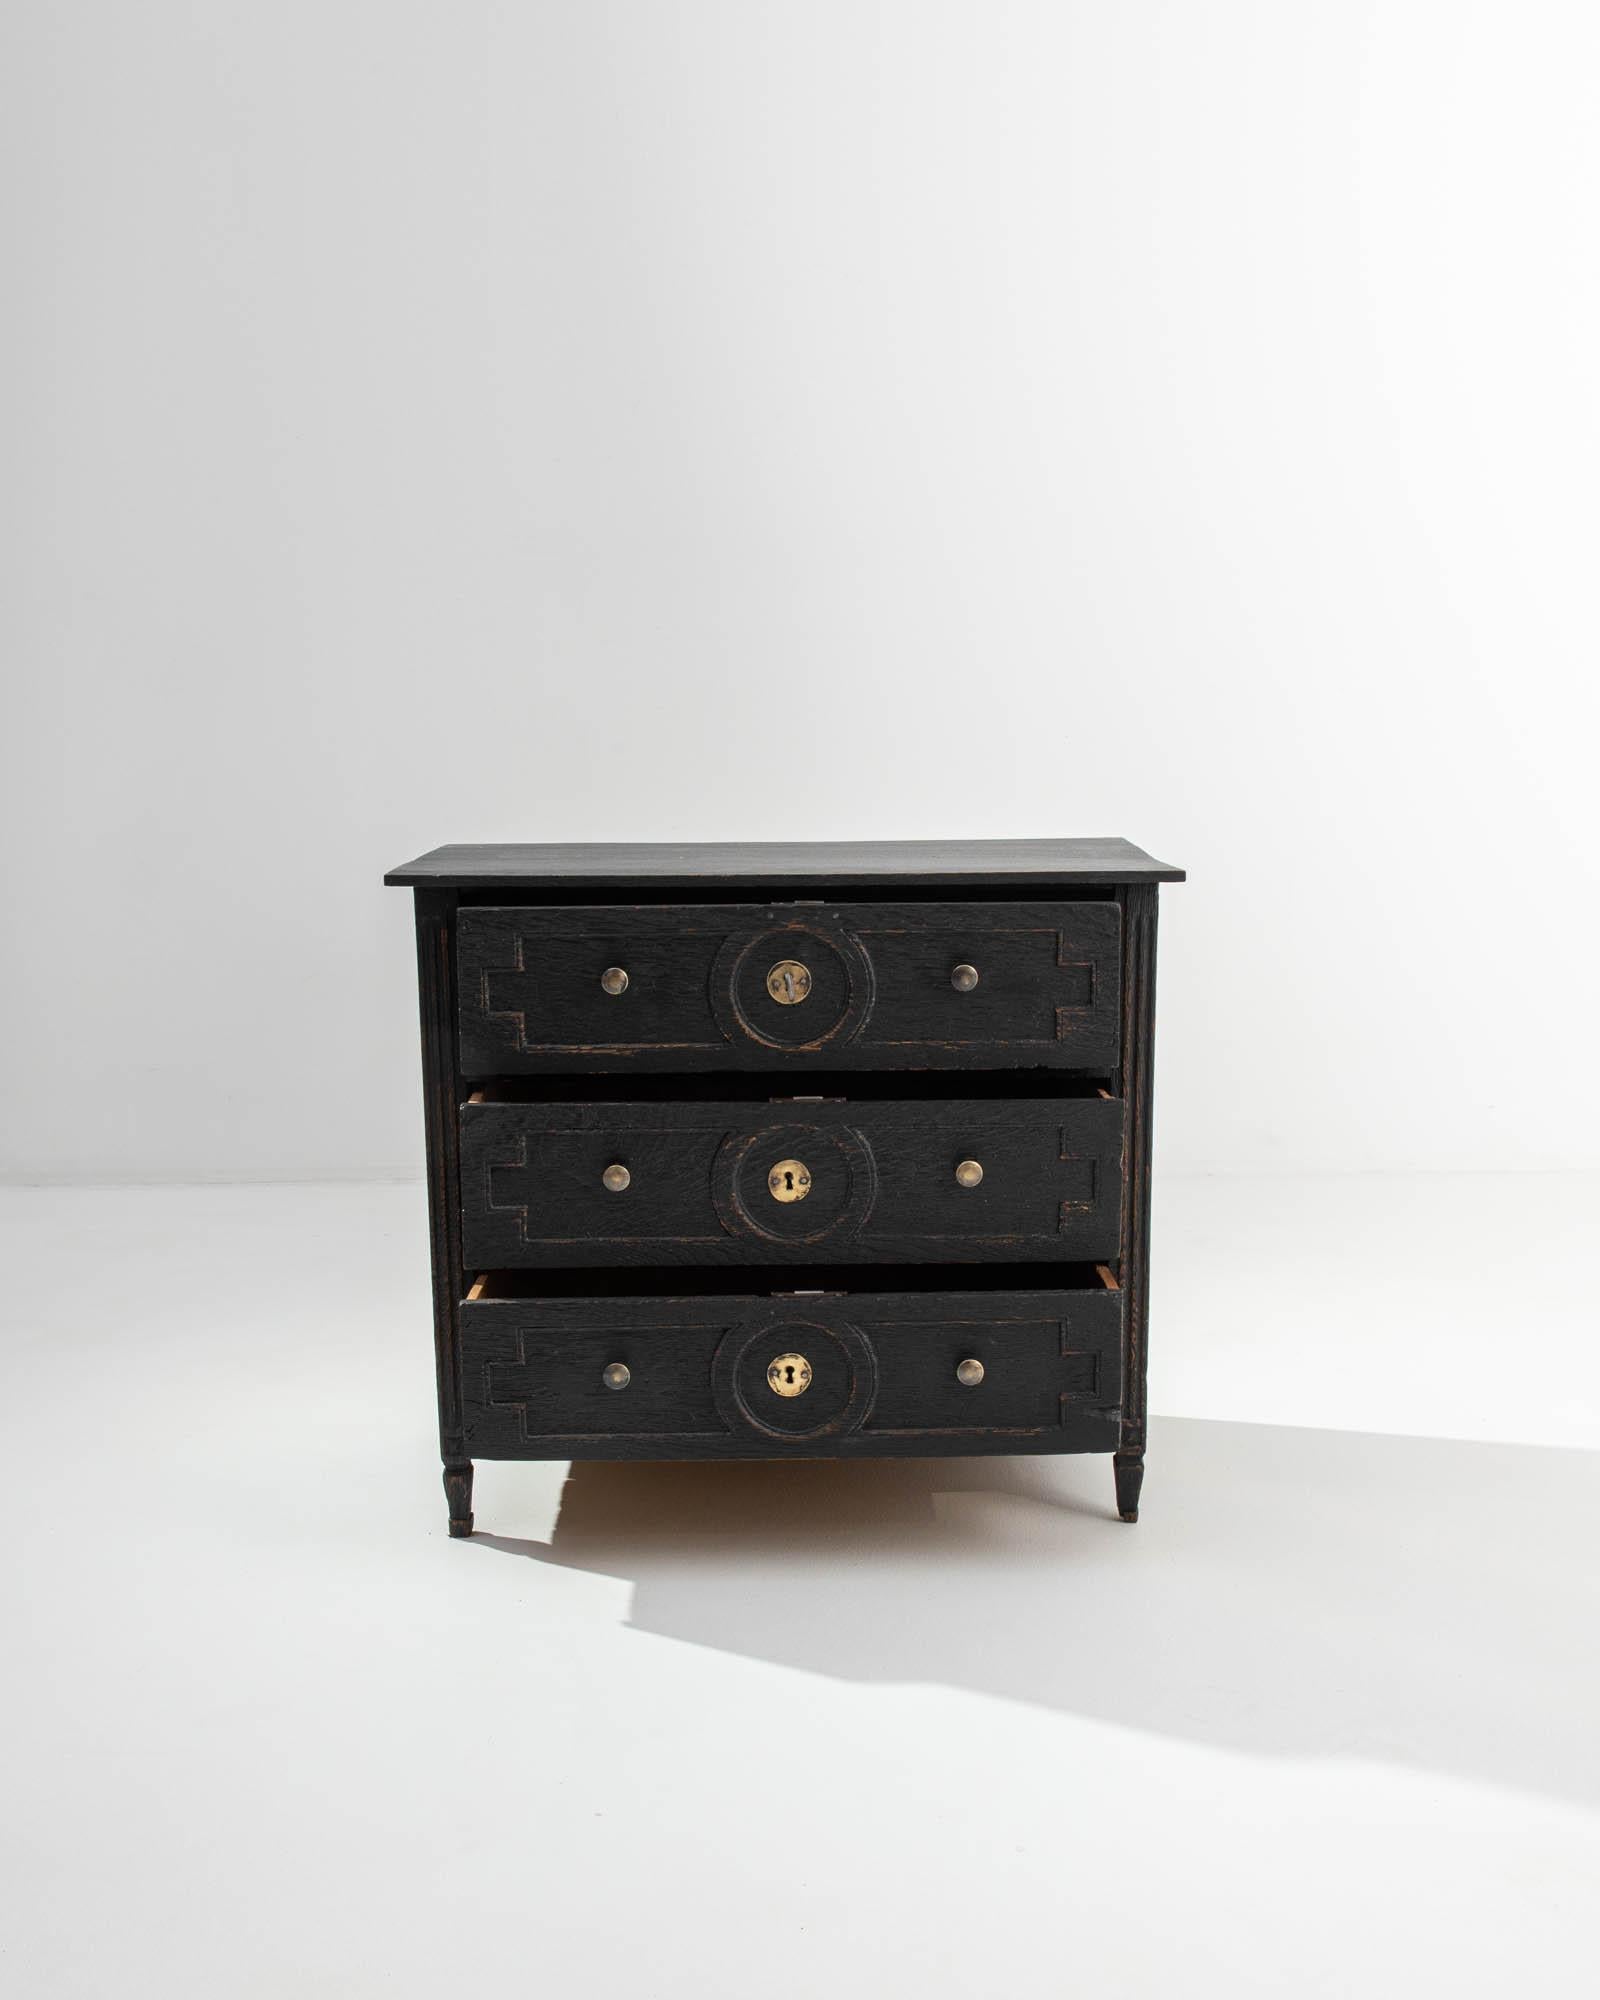 Neoclassical Revival 19th Century Dutch Petite Chest of Drawers